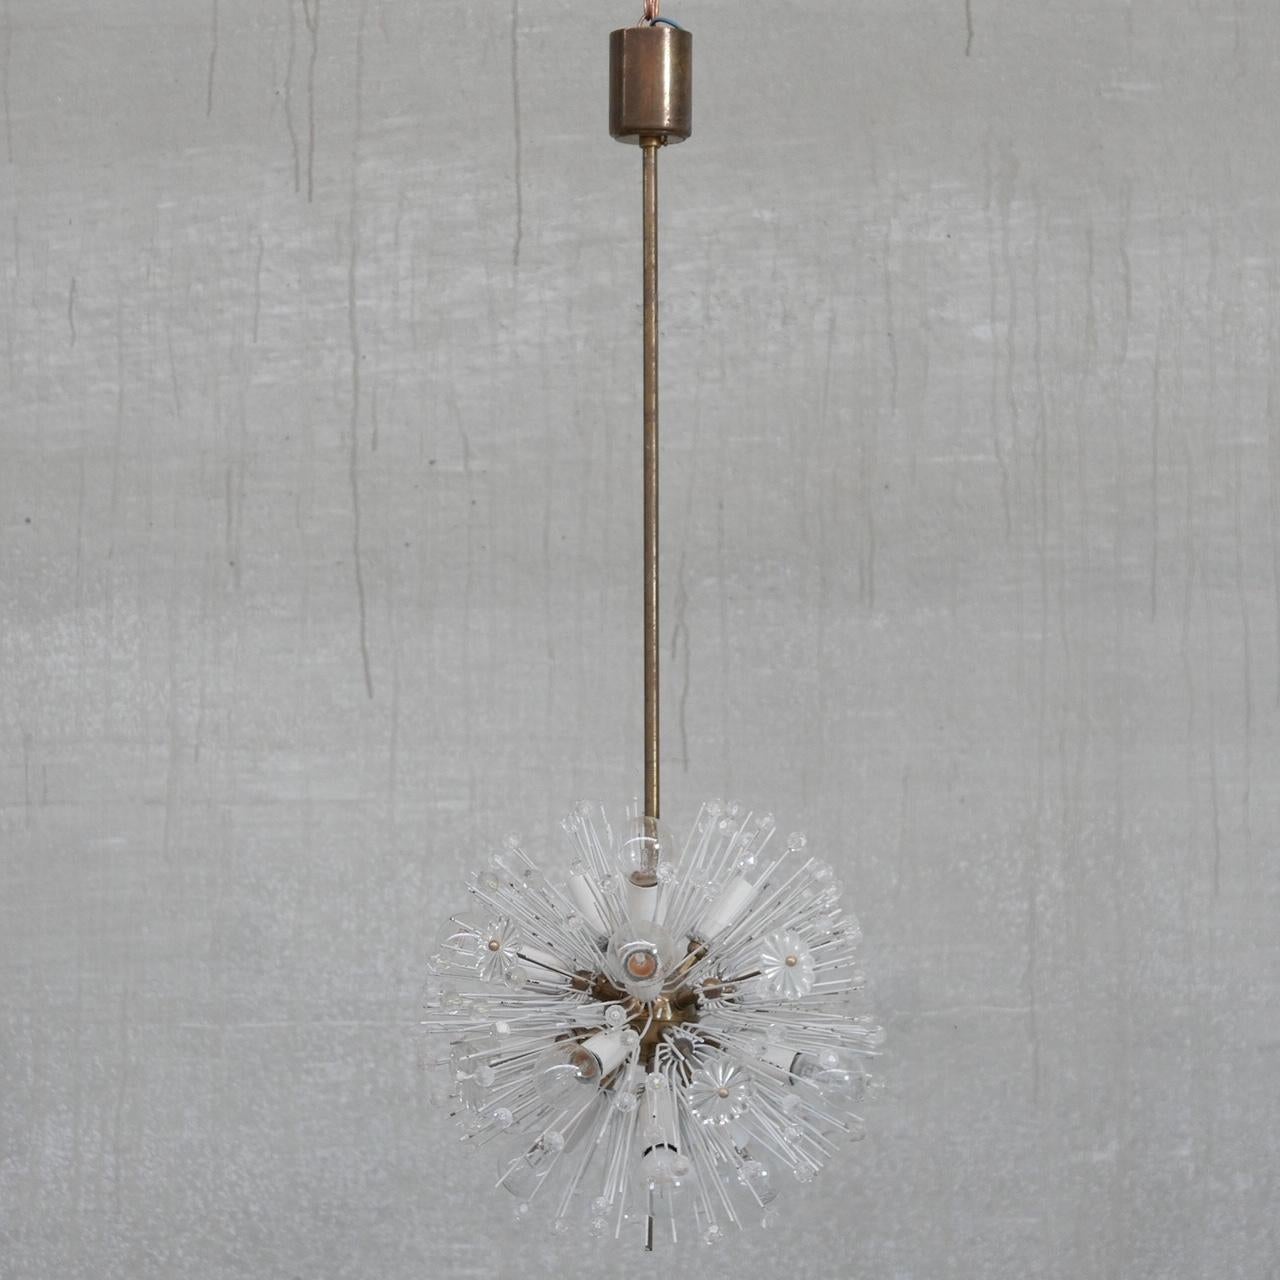 Mid-20th Century Austrian Mid-Century Glass and Brass Chandelier Pendant by Emil Stejnar For Sale